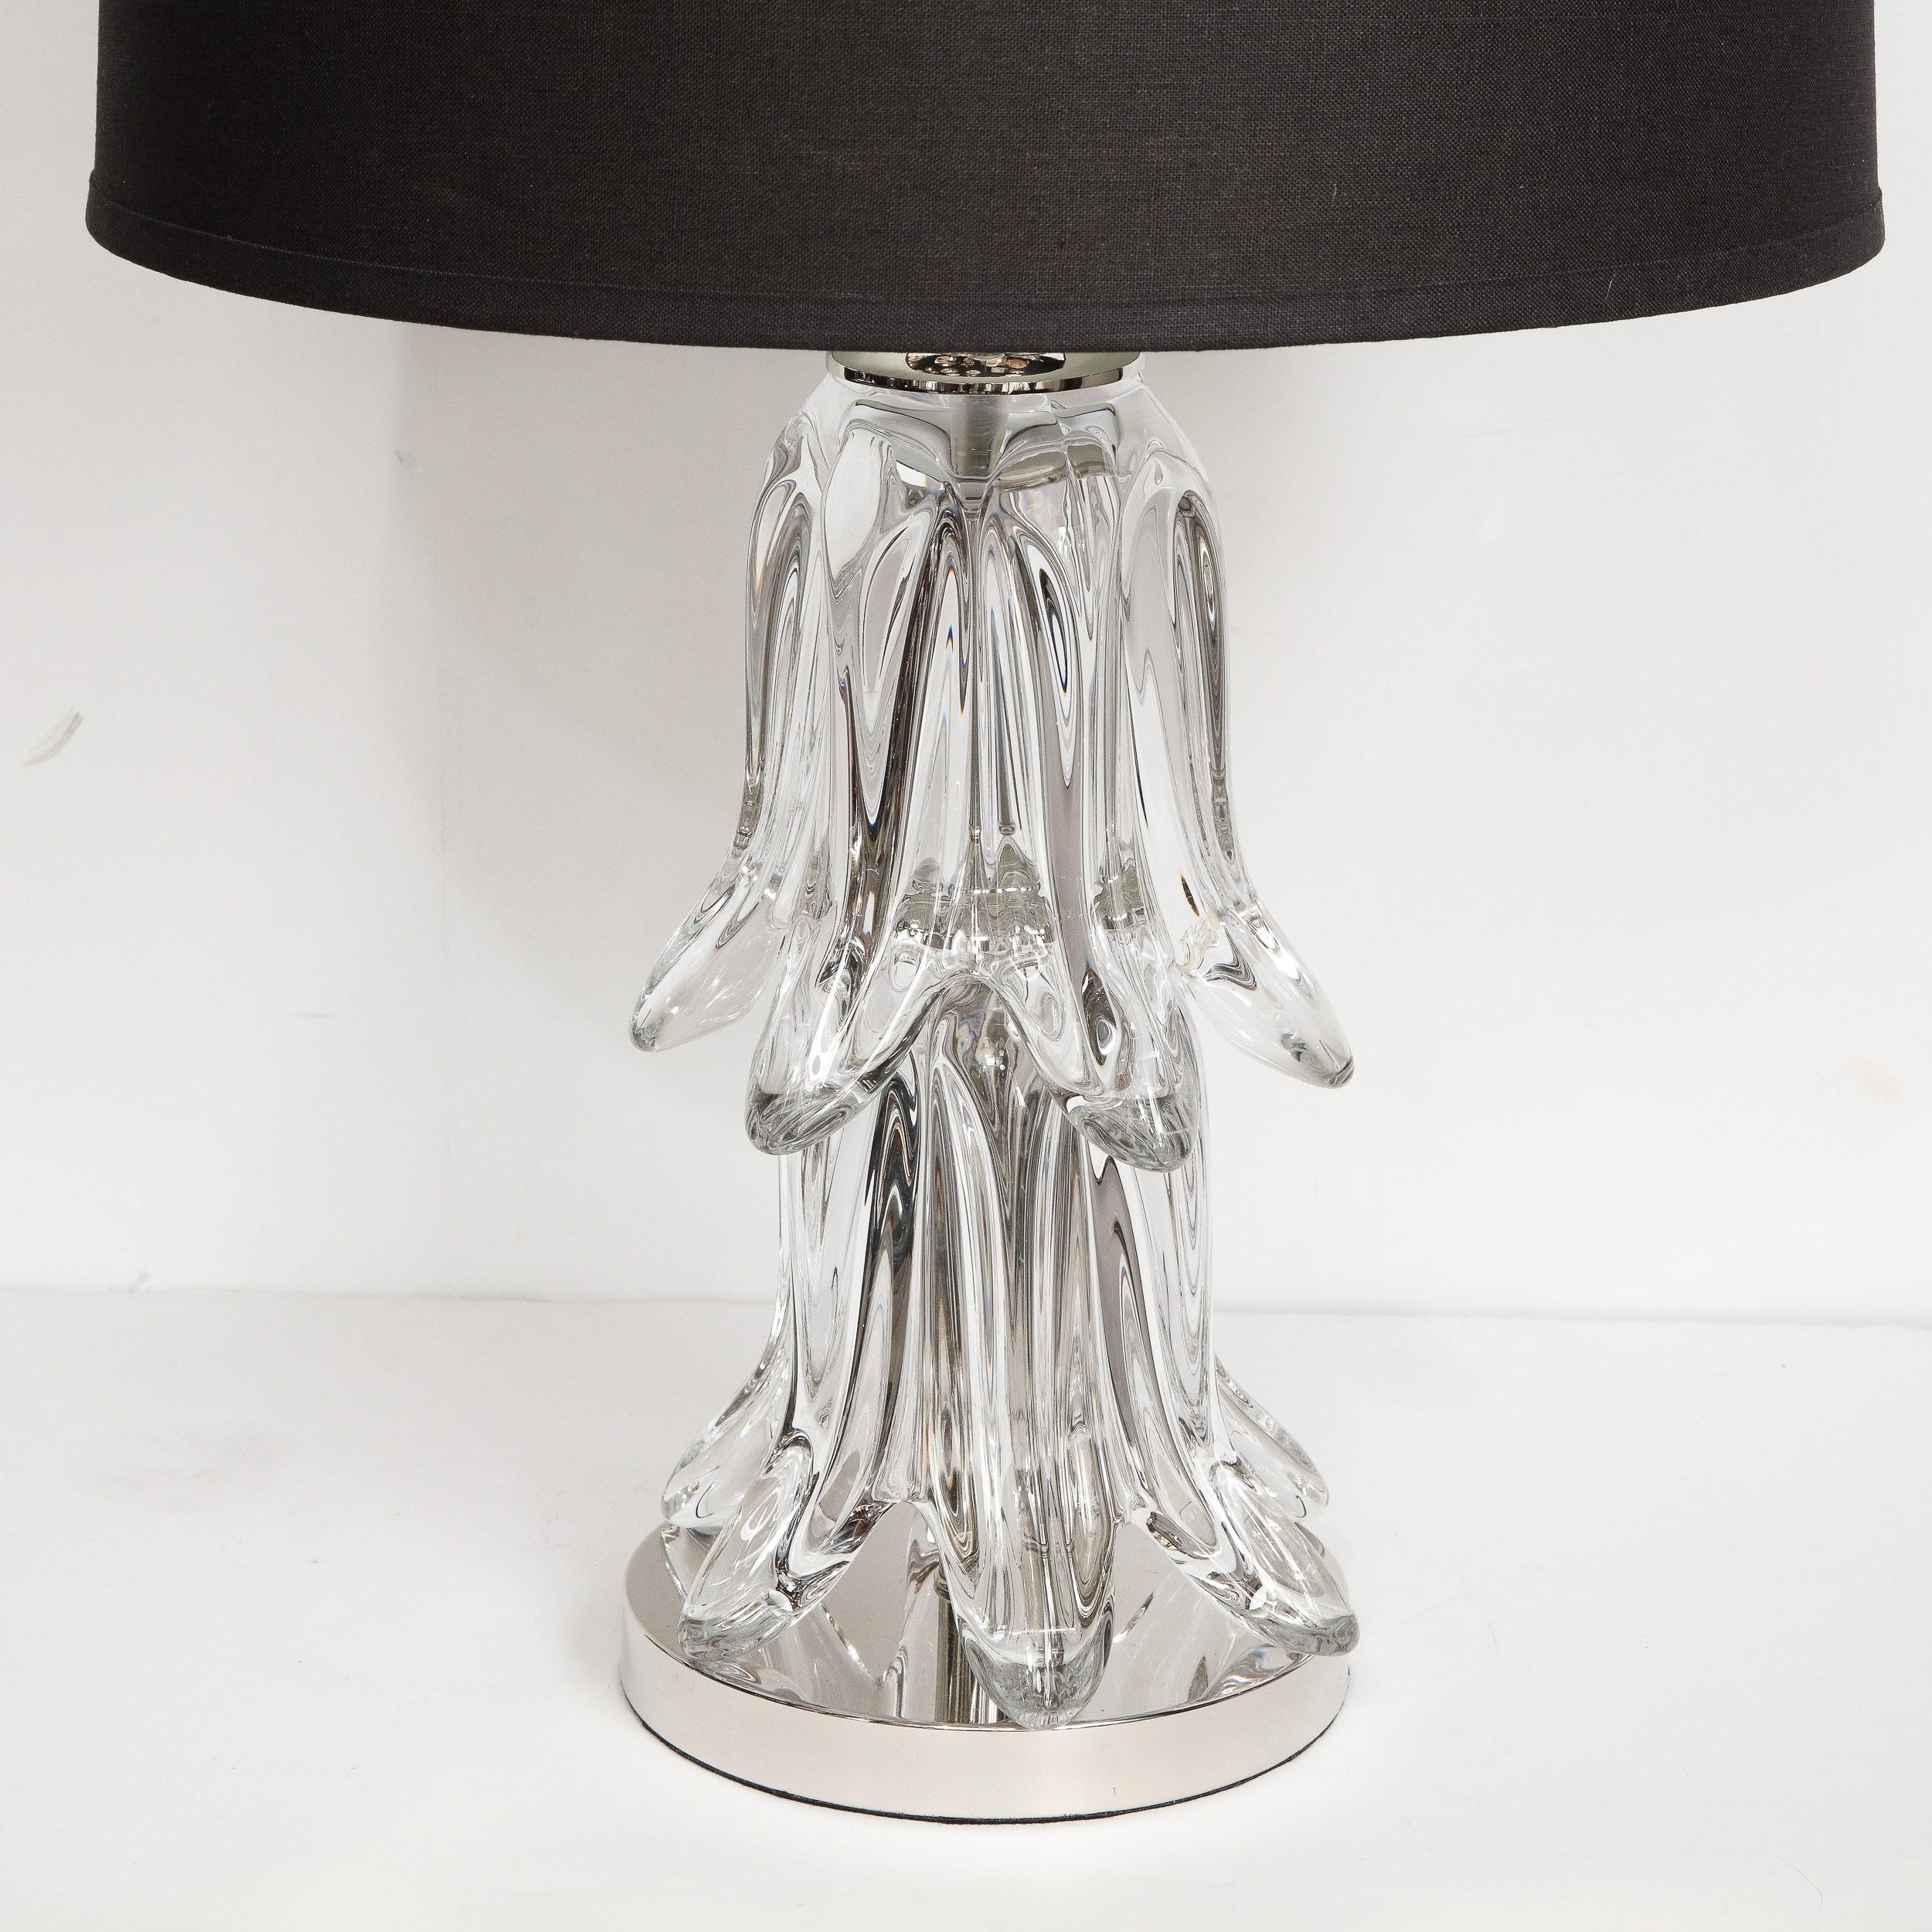 This graphic and refined pair of Mid-Century Modern table lamps were realized in the United States, circa 1950. The lamps feature two tiers of abstracted leaf like forms cascading downwards atop a circular polished chrome base. There are chrome